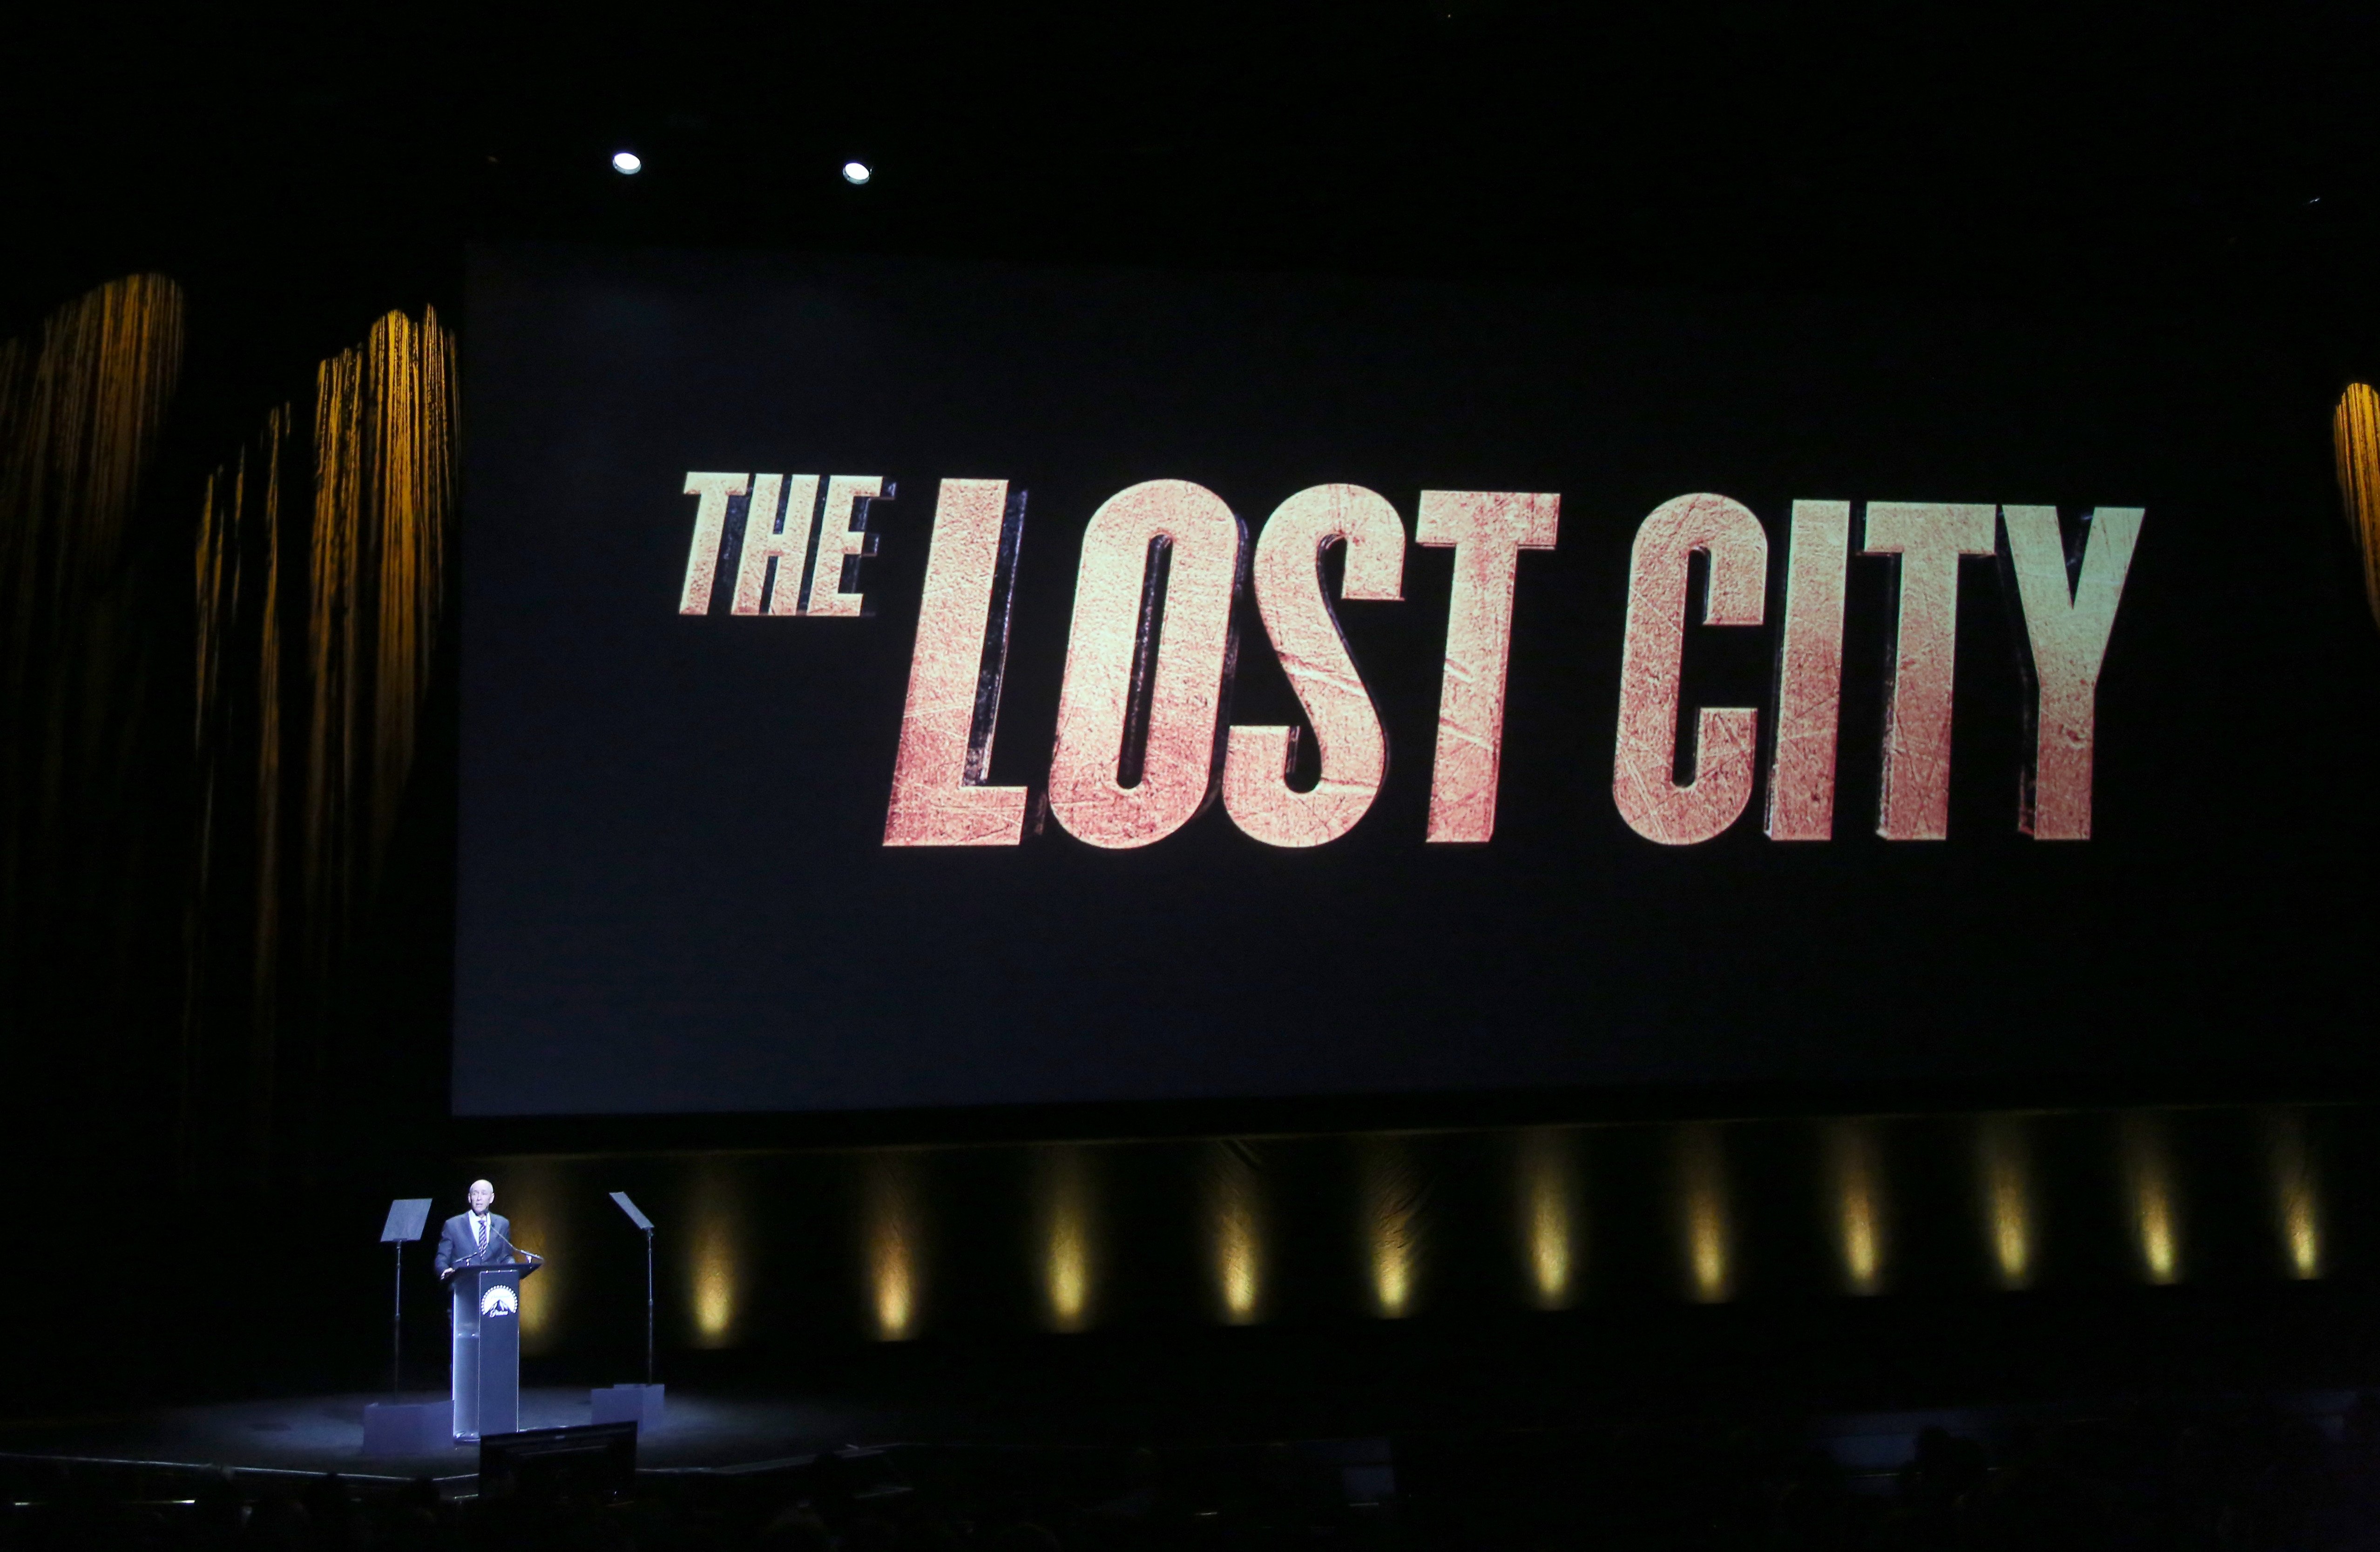 Paramount Pictures President of Domestic Distribution Chris Aronson speaks about the "The Lost City" movie during Paramount Pictures Studios presentation at Caesars Palace during CinemaCon 2022, the official convention of the National Association of Theatre Owners, on April 28, 2022 in Las Vegas, Nevada. | Source: Getty Images